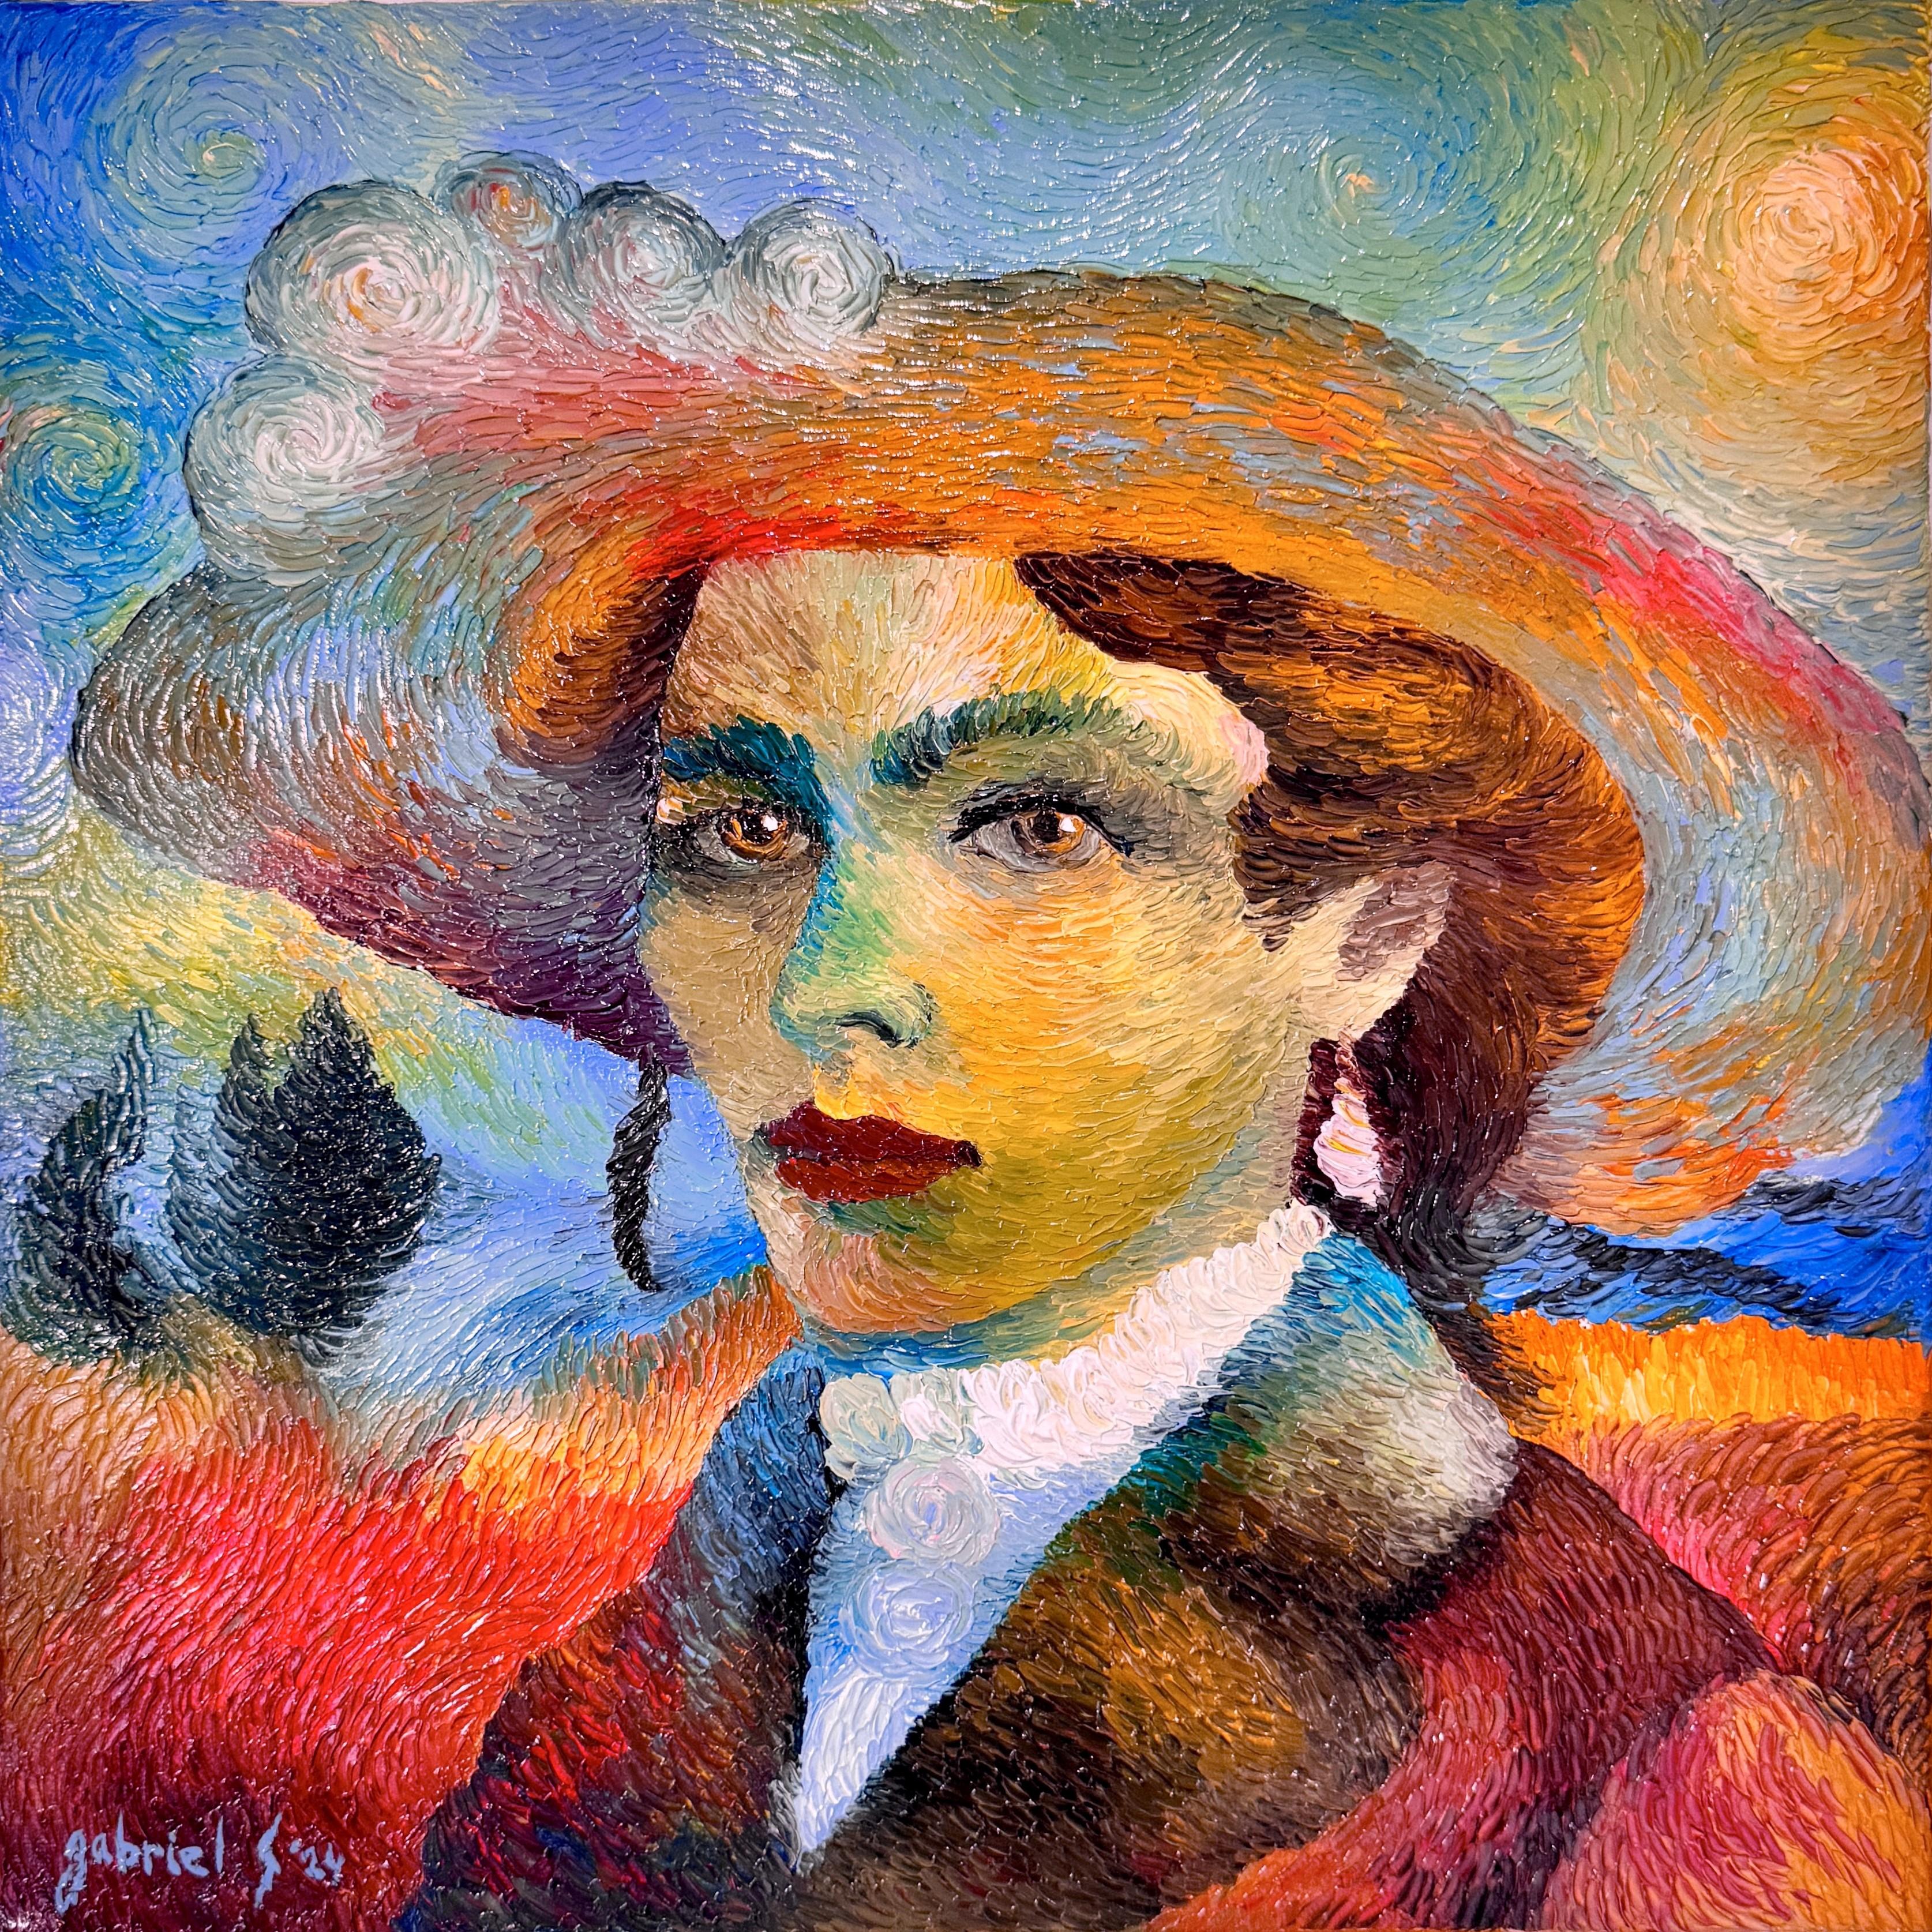 Gabriel Stama Figurative Painting - "Lady Gogh", Textured And Colourful Oil Painting On Canvas, Petrino Style